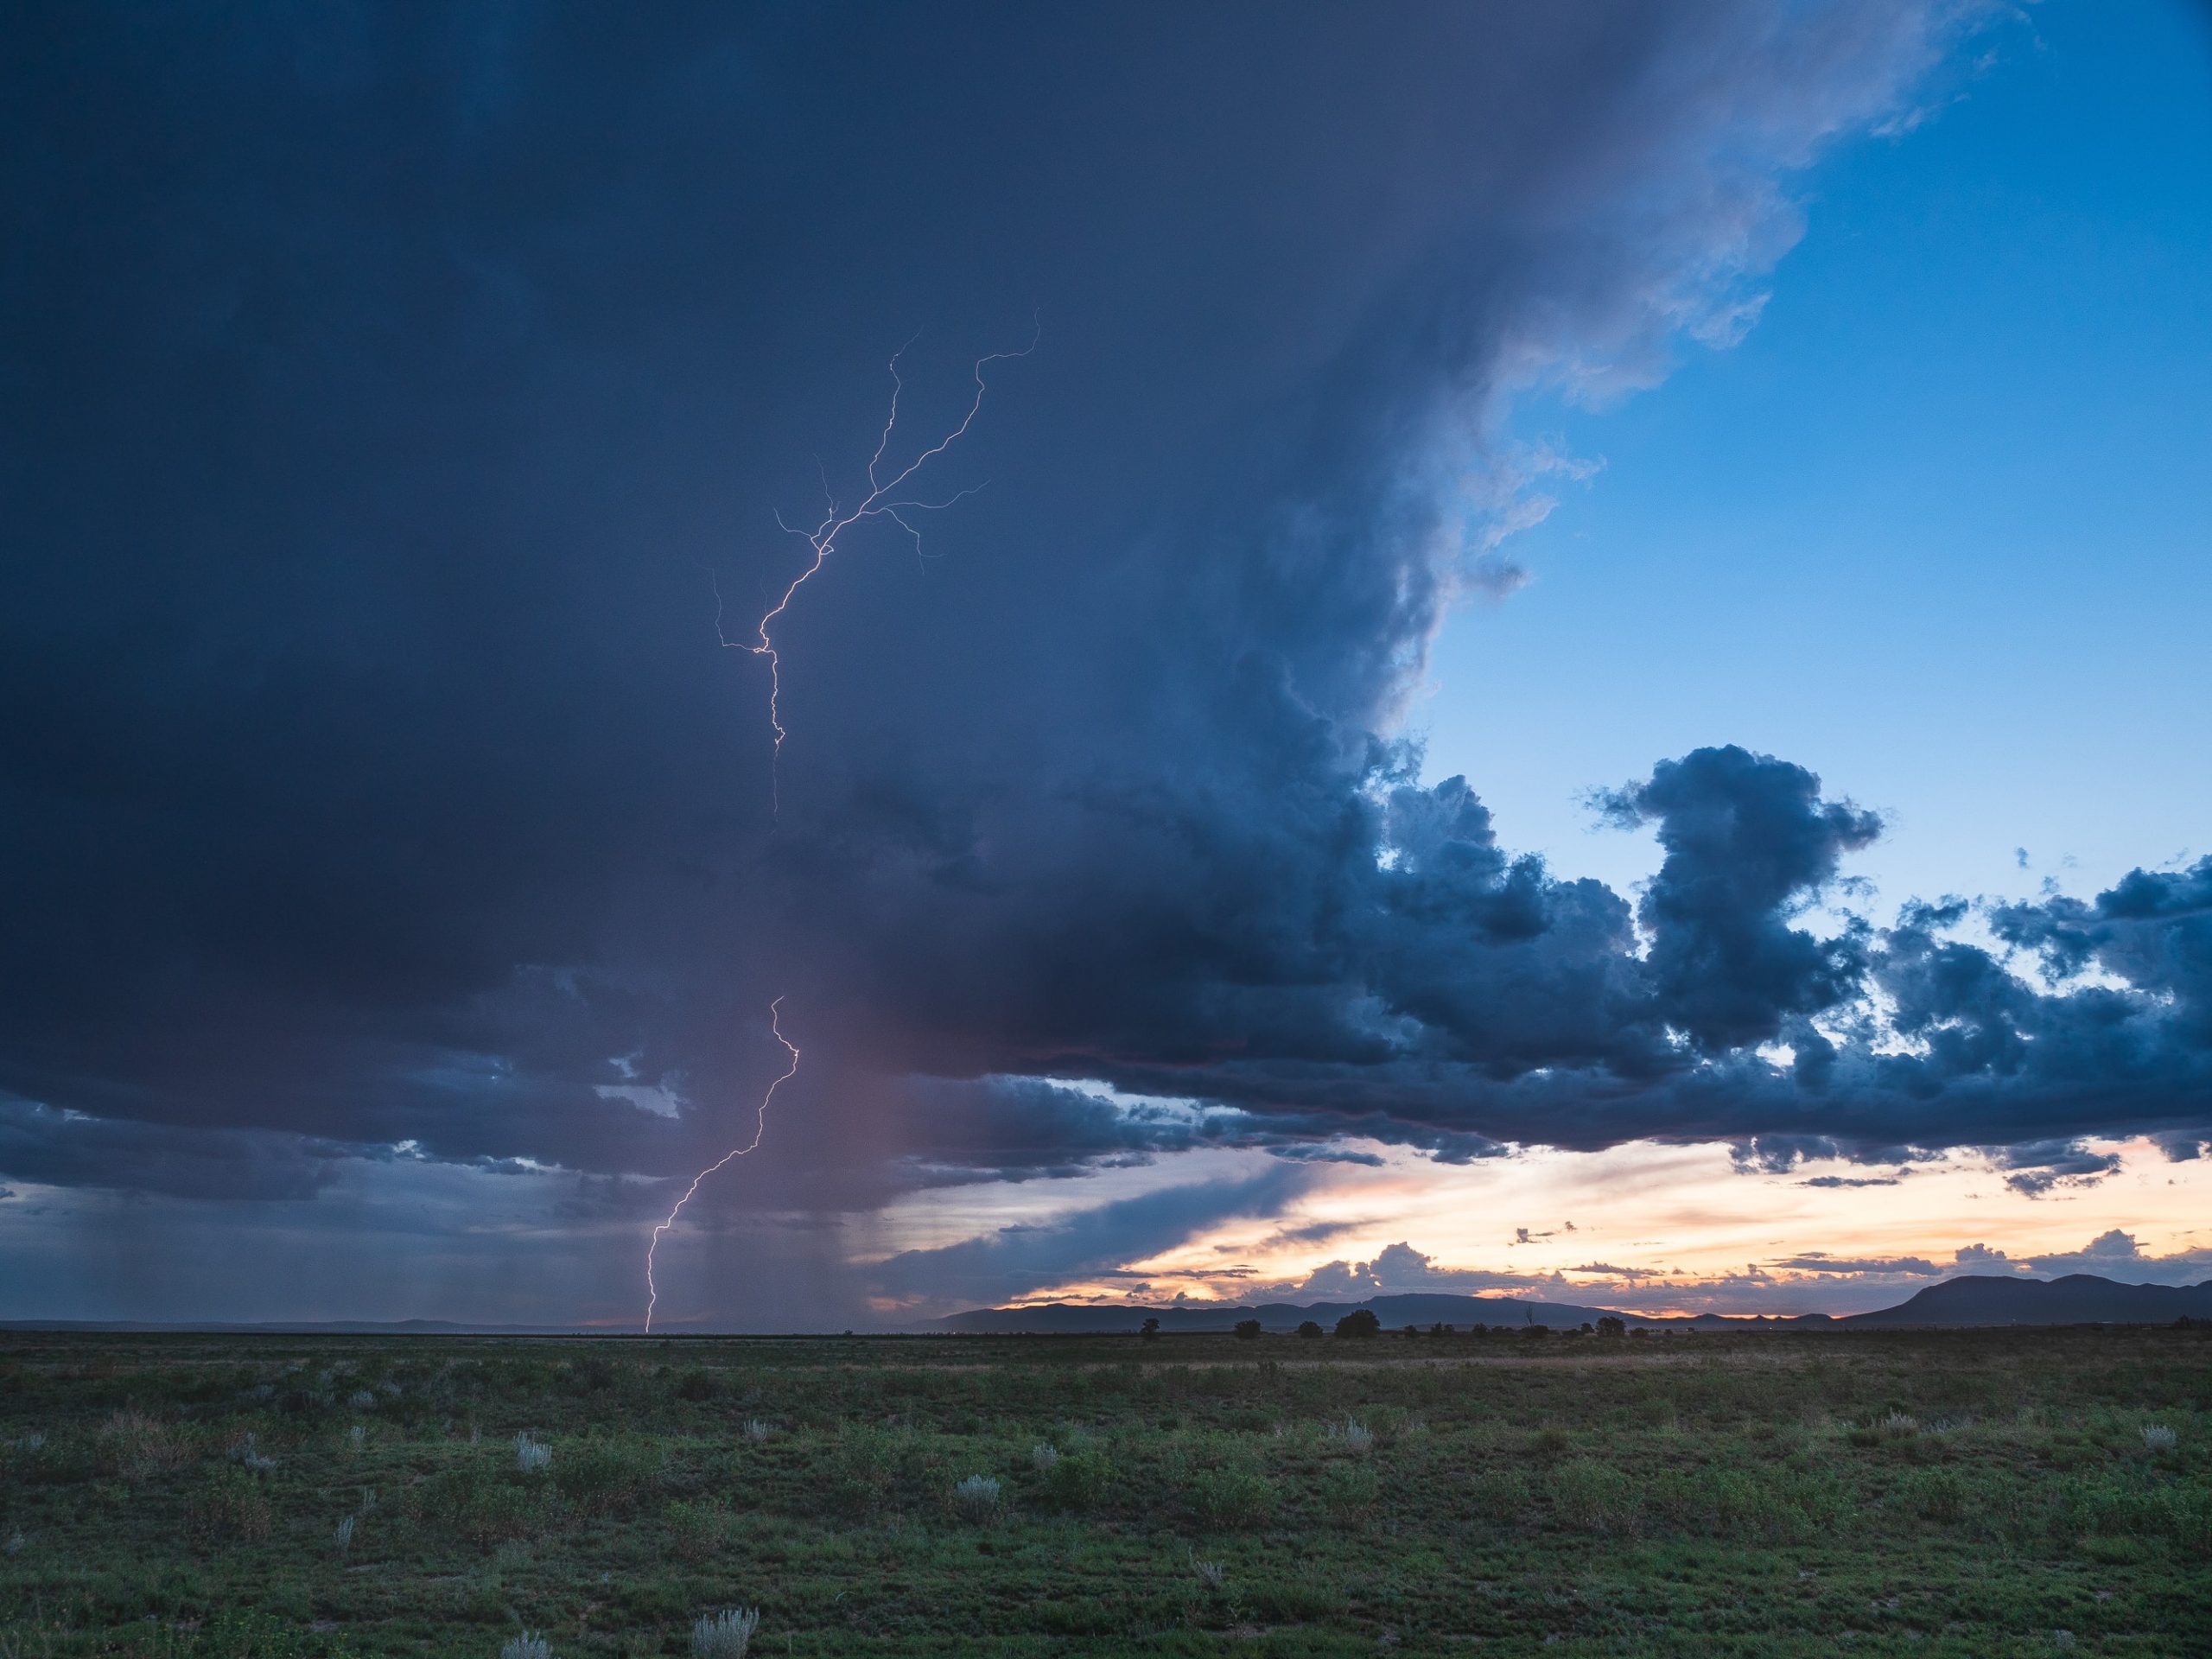 A photograph of a bolt of lightening striking an empty green field. The sky is filled with several dark clouds heavy with rain. In the right side of the photo, there is a gap in the clouds where a deep blue sky and a yellow-orange sunset are peeking through.